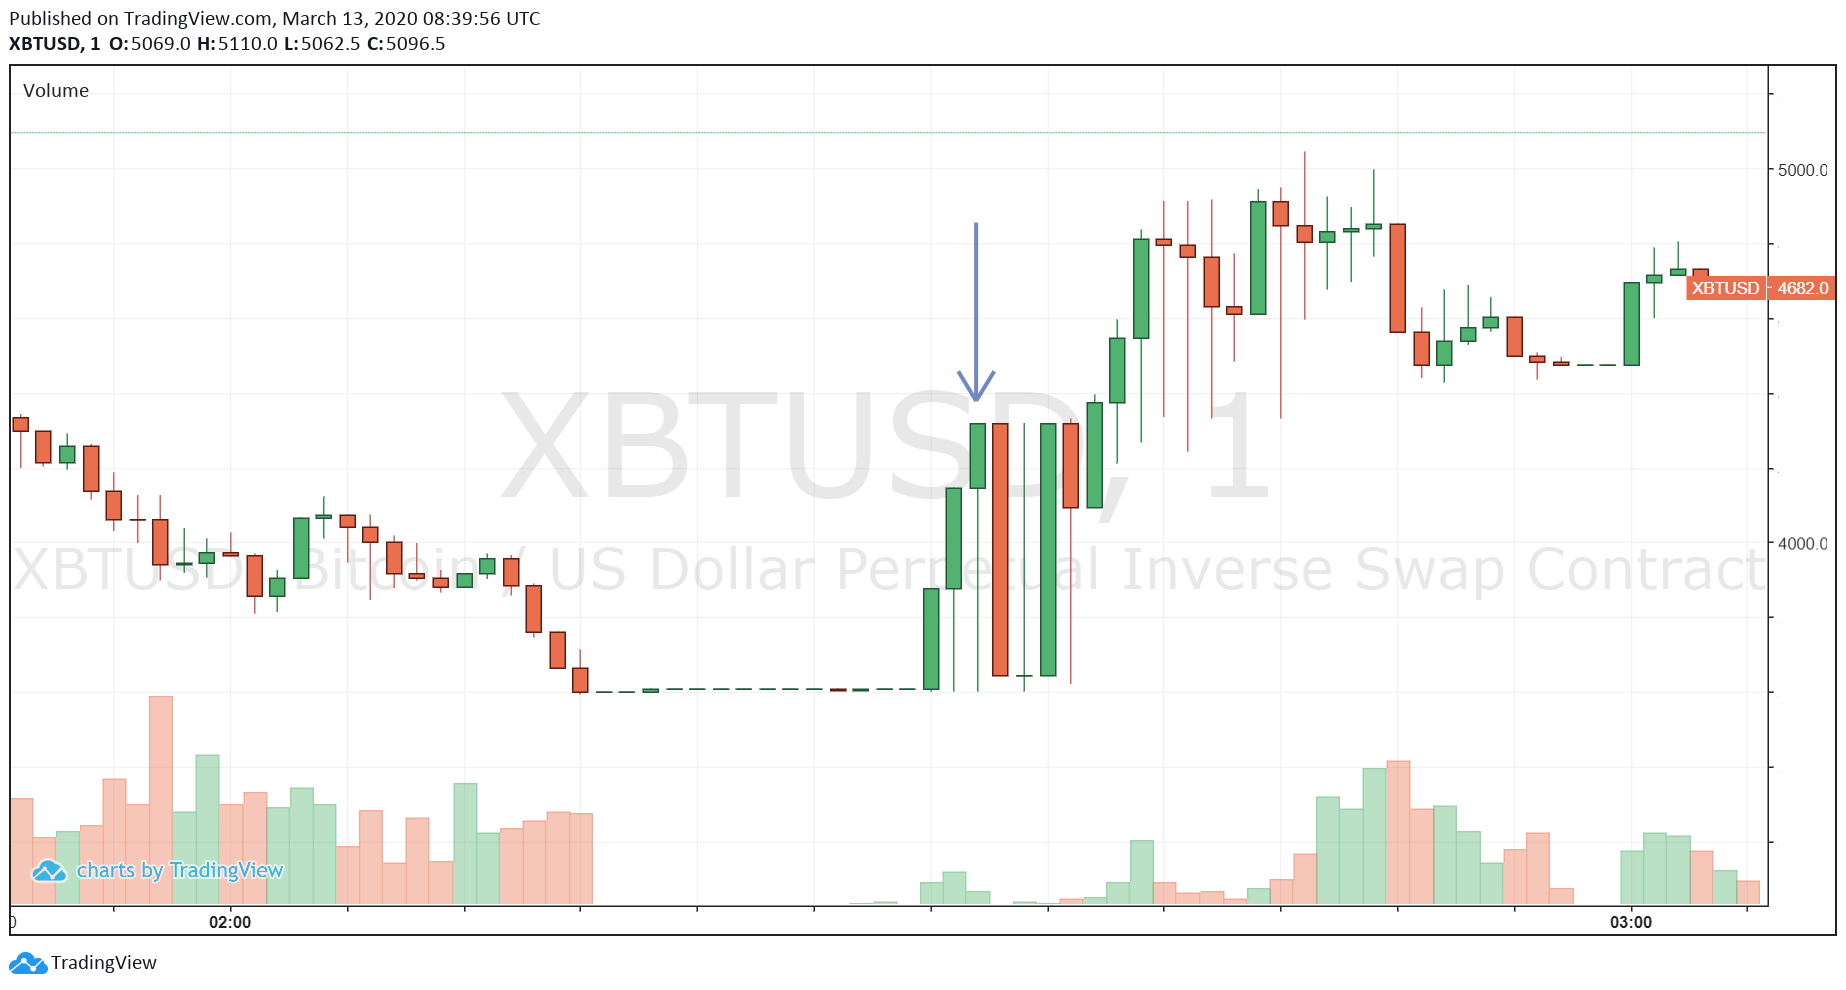 Source: XBTUSD on Trading View